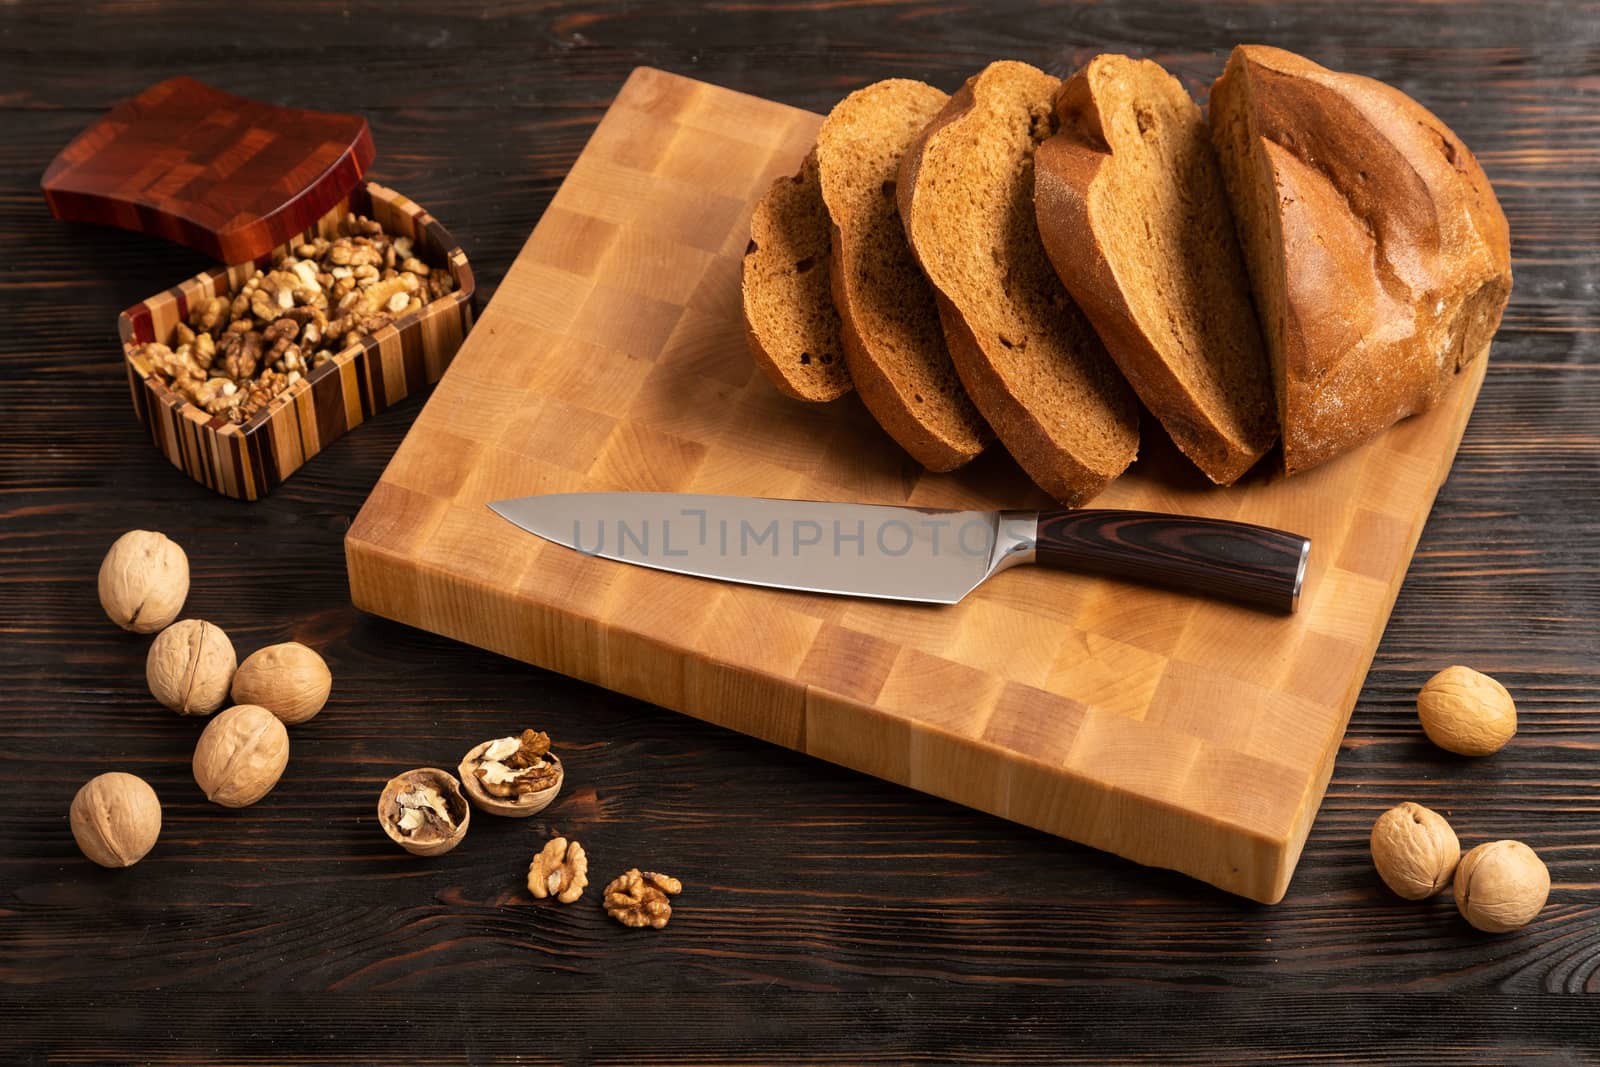 A loaf of bread sliced into slices with a knife by sveter